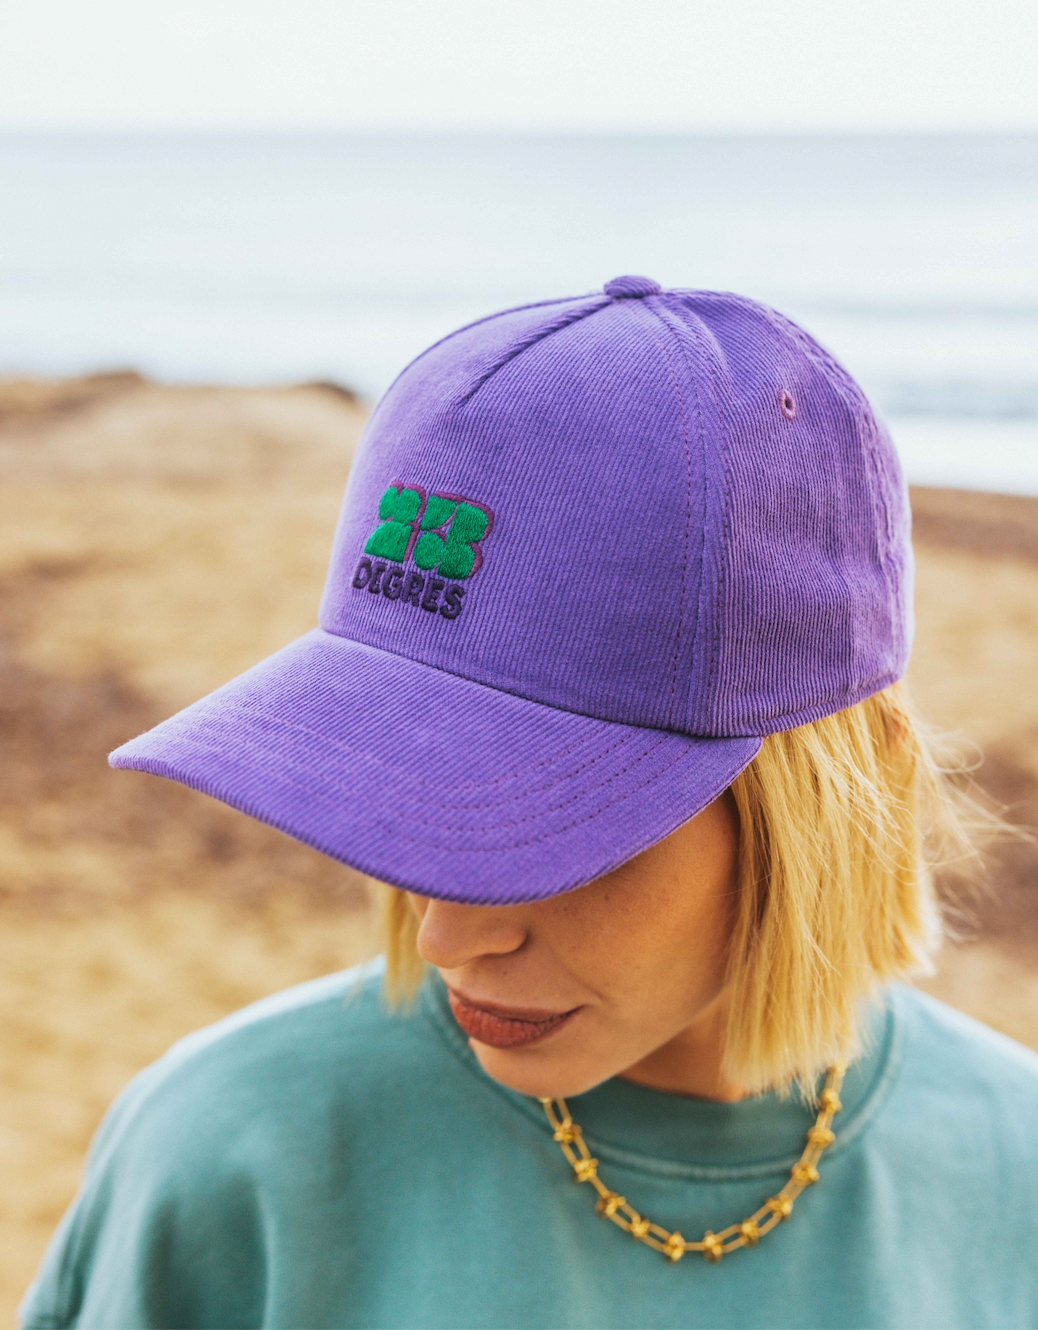 Casquette Violette éco-responsable made in Portugal velours 